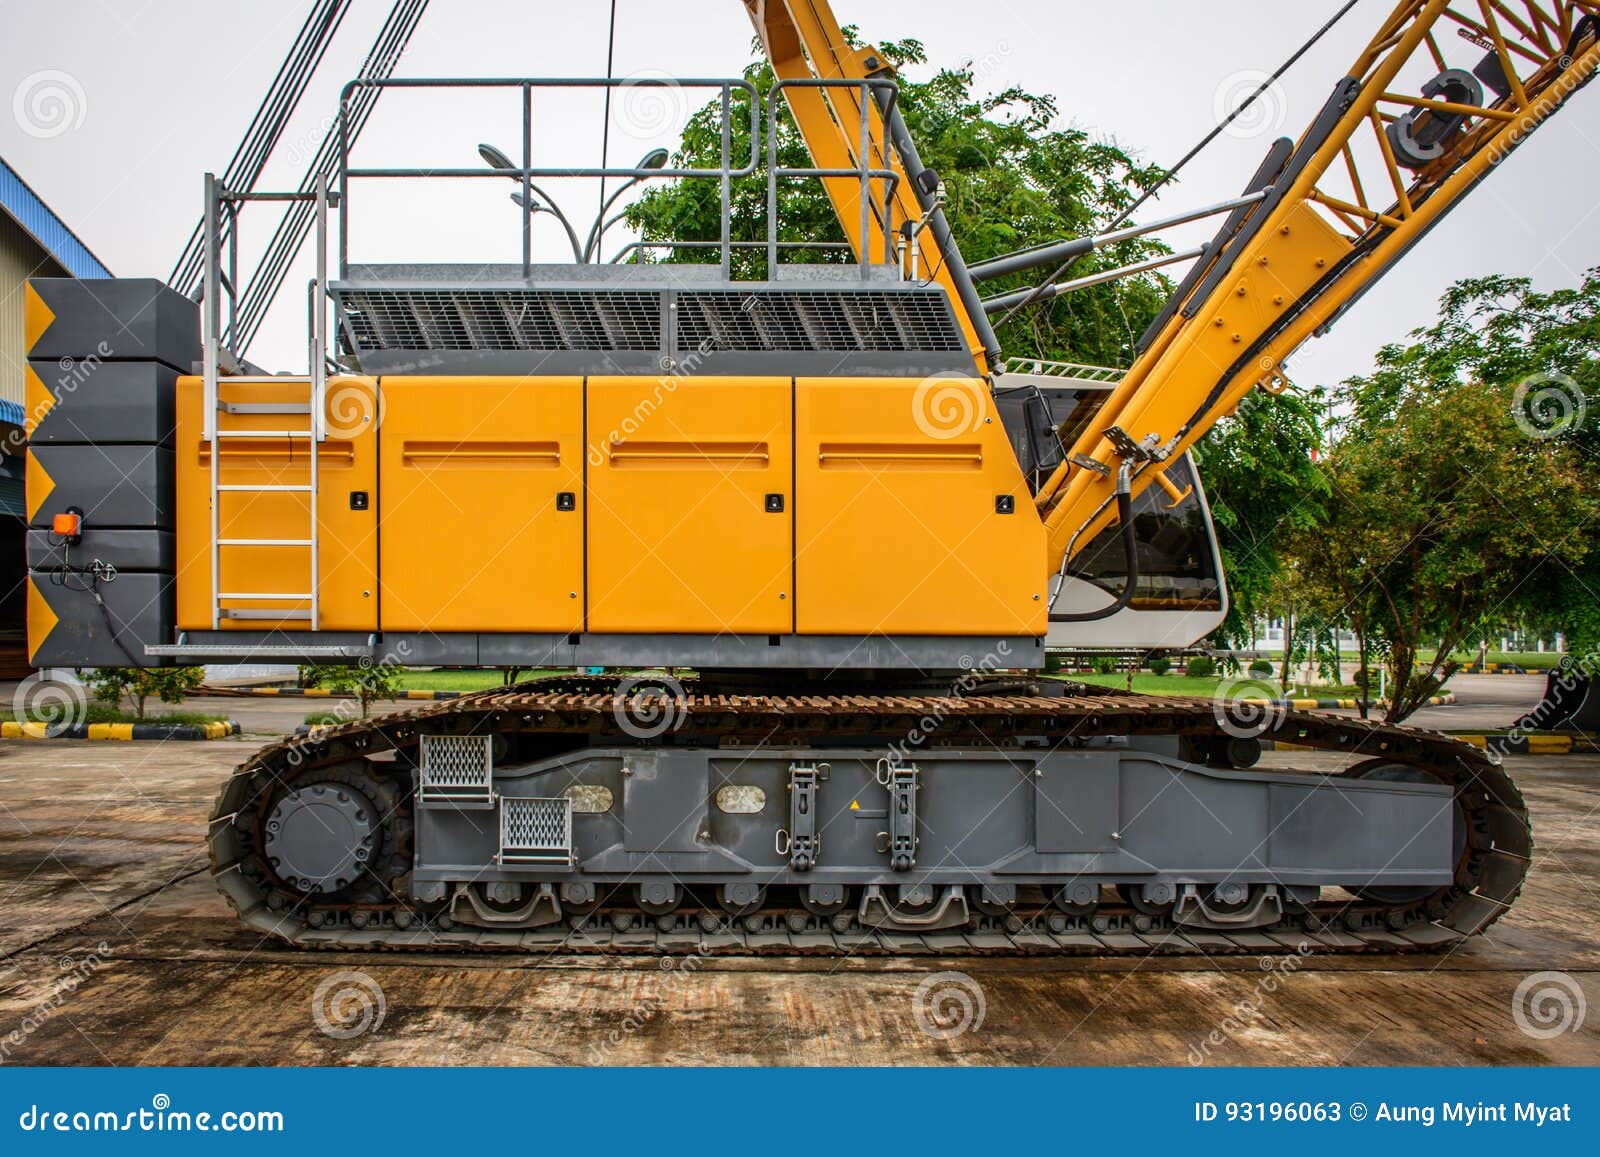 side view of crawler crane, counterweights, big chain and arms